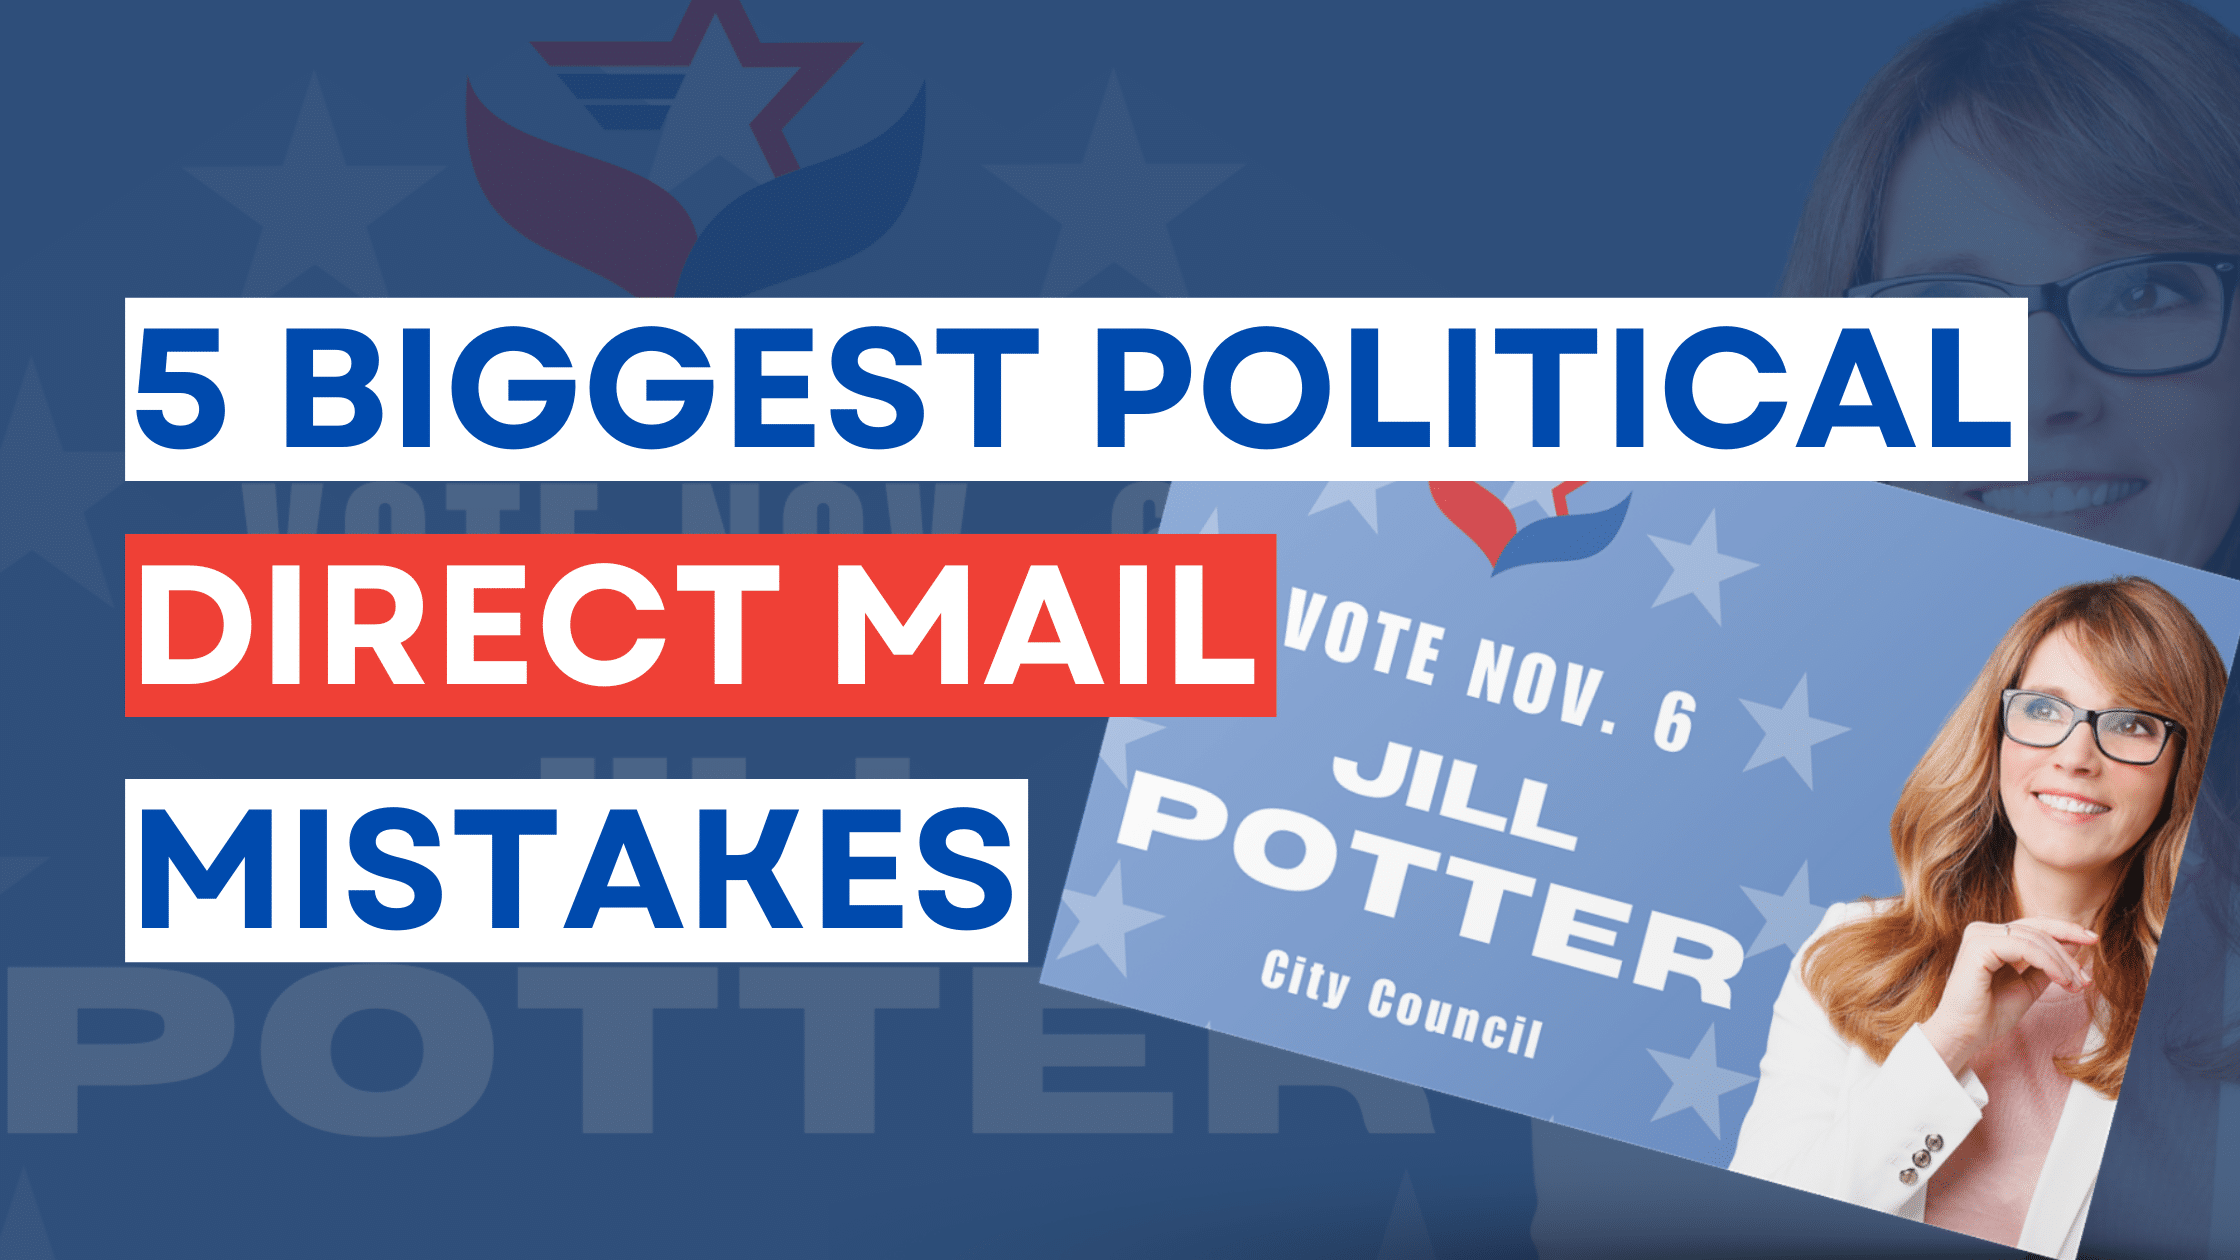 5 biggest political direct mail mistakes